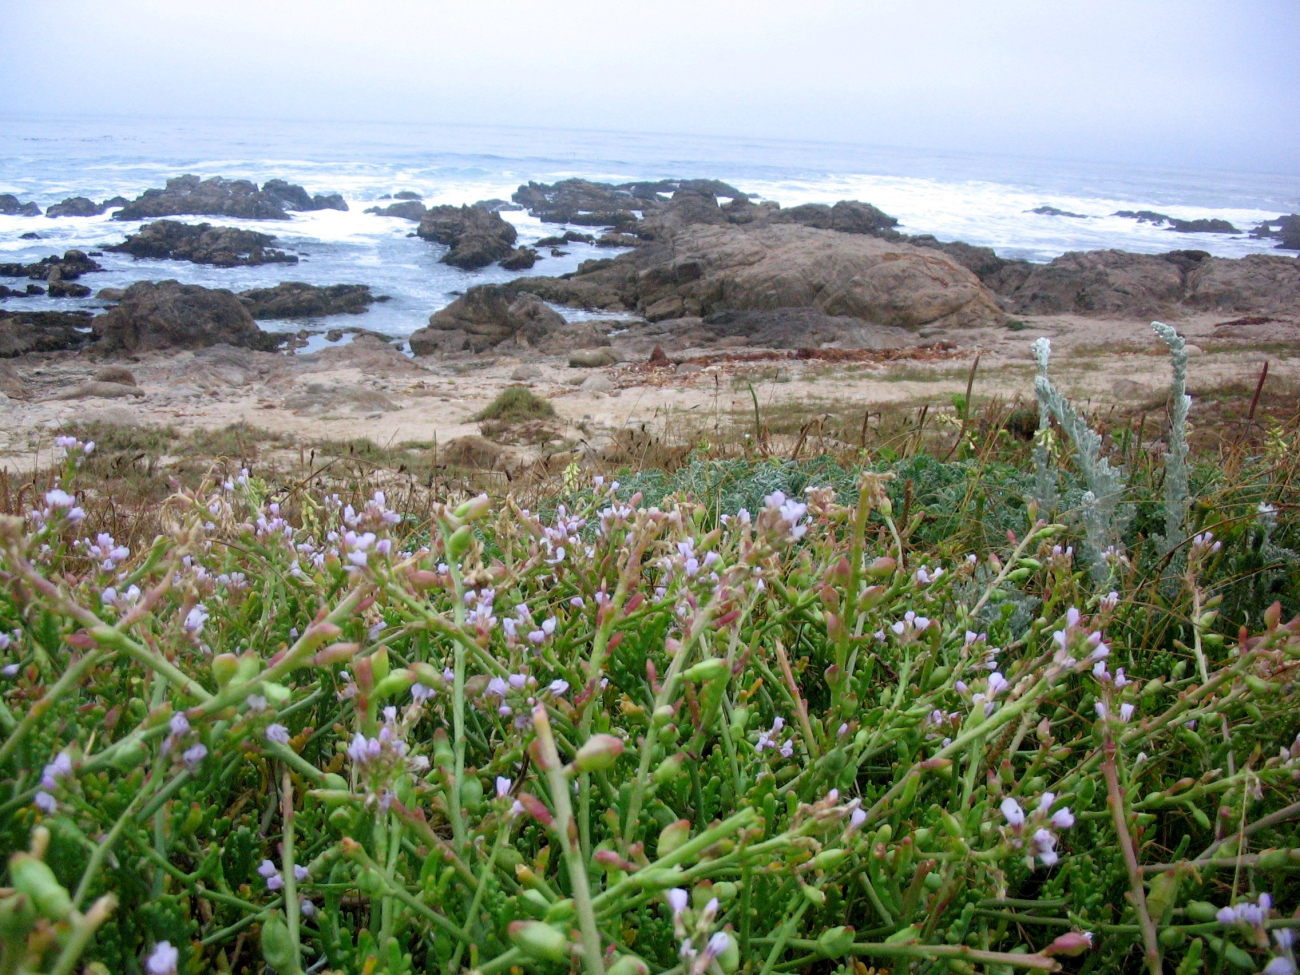 Unidentified lavendar flowers with rocky shore and ocean in the background